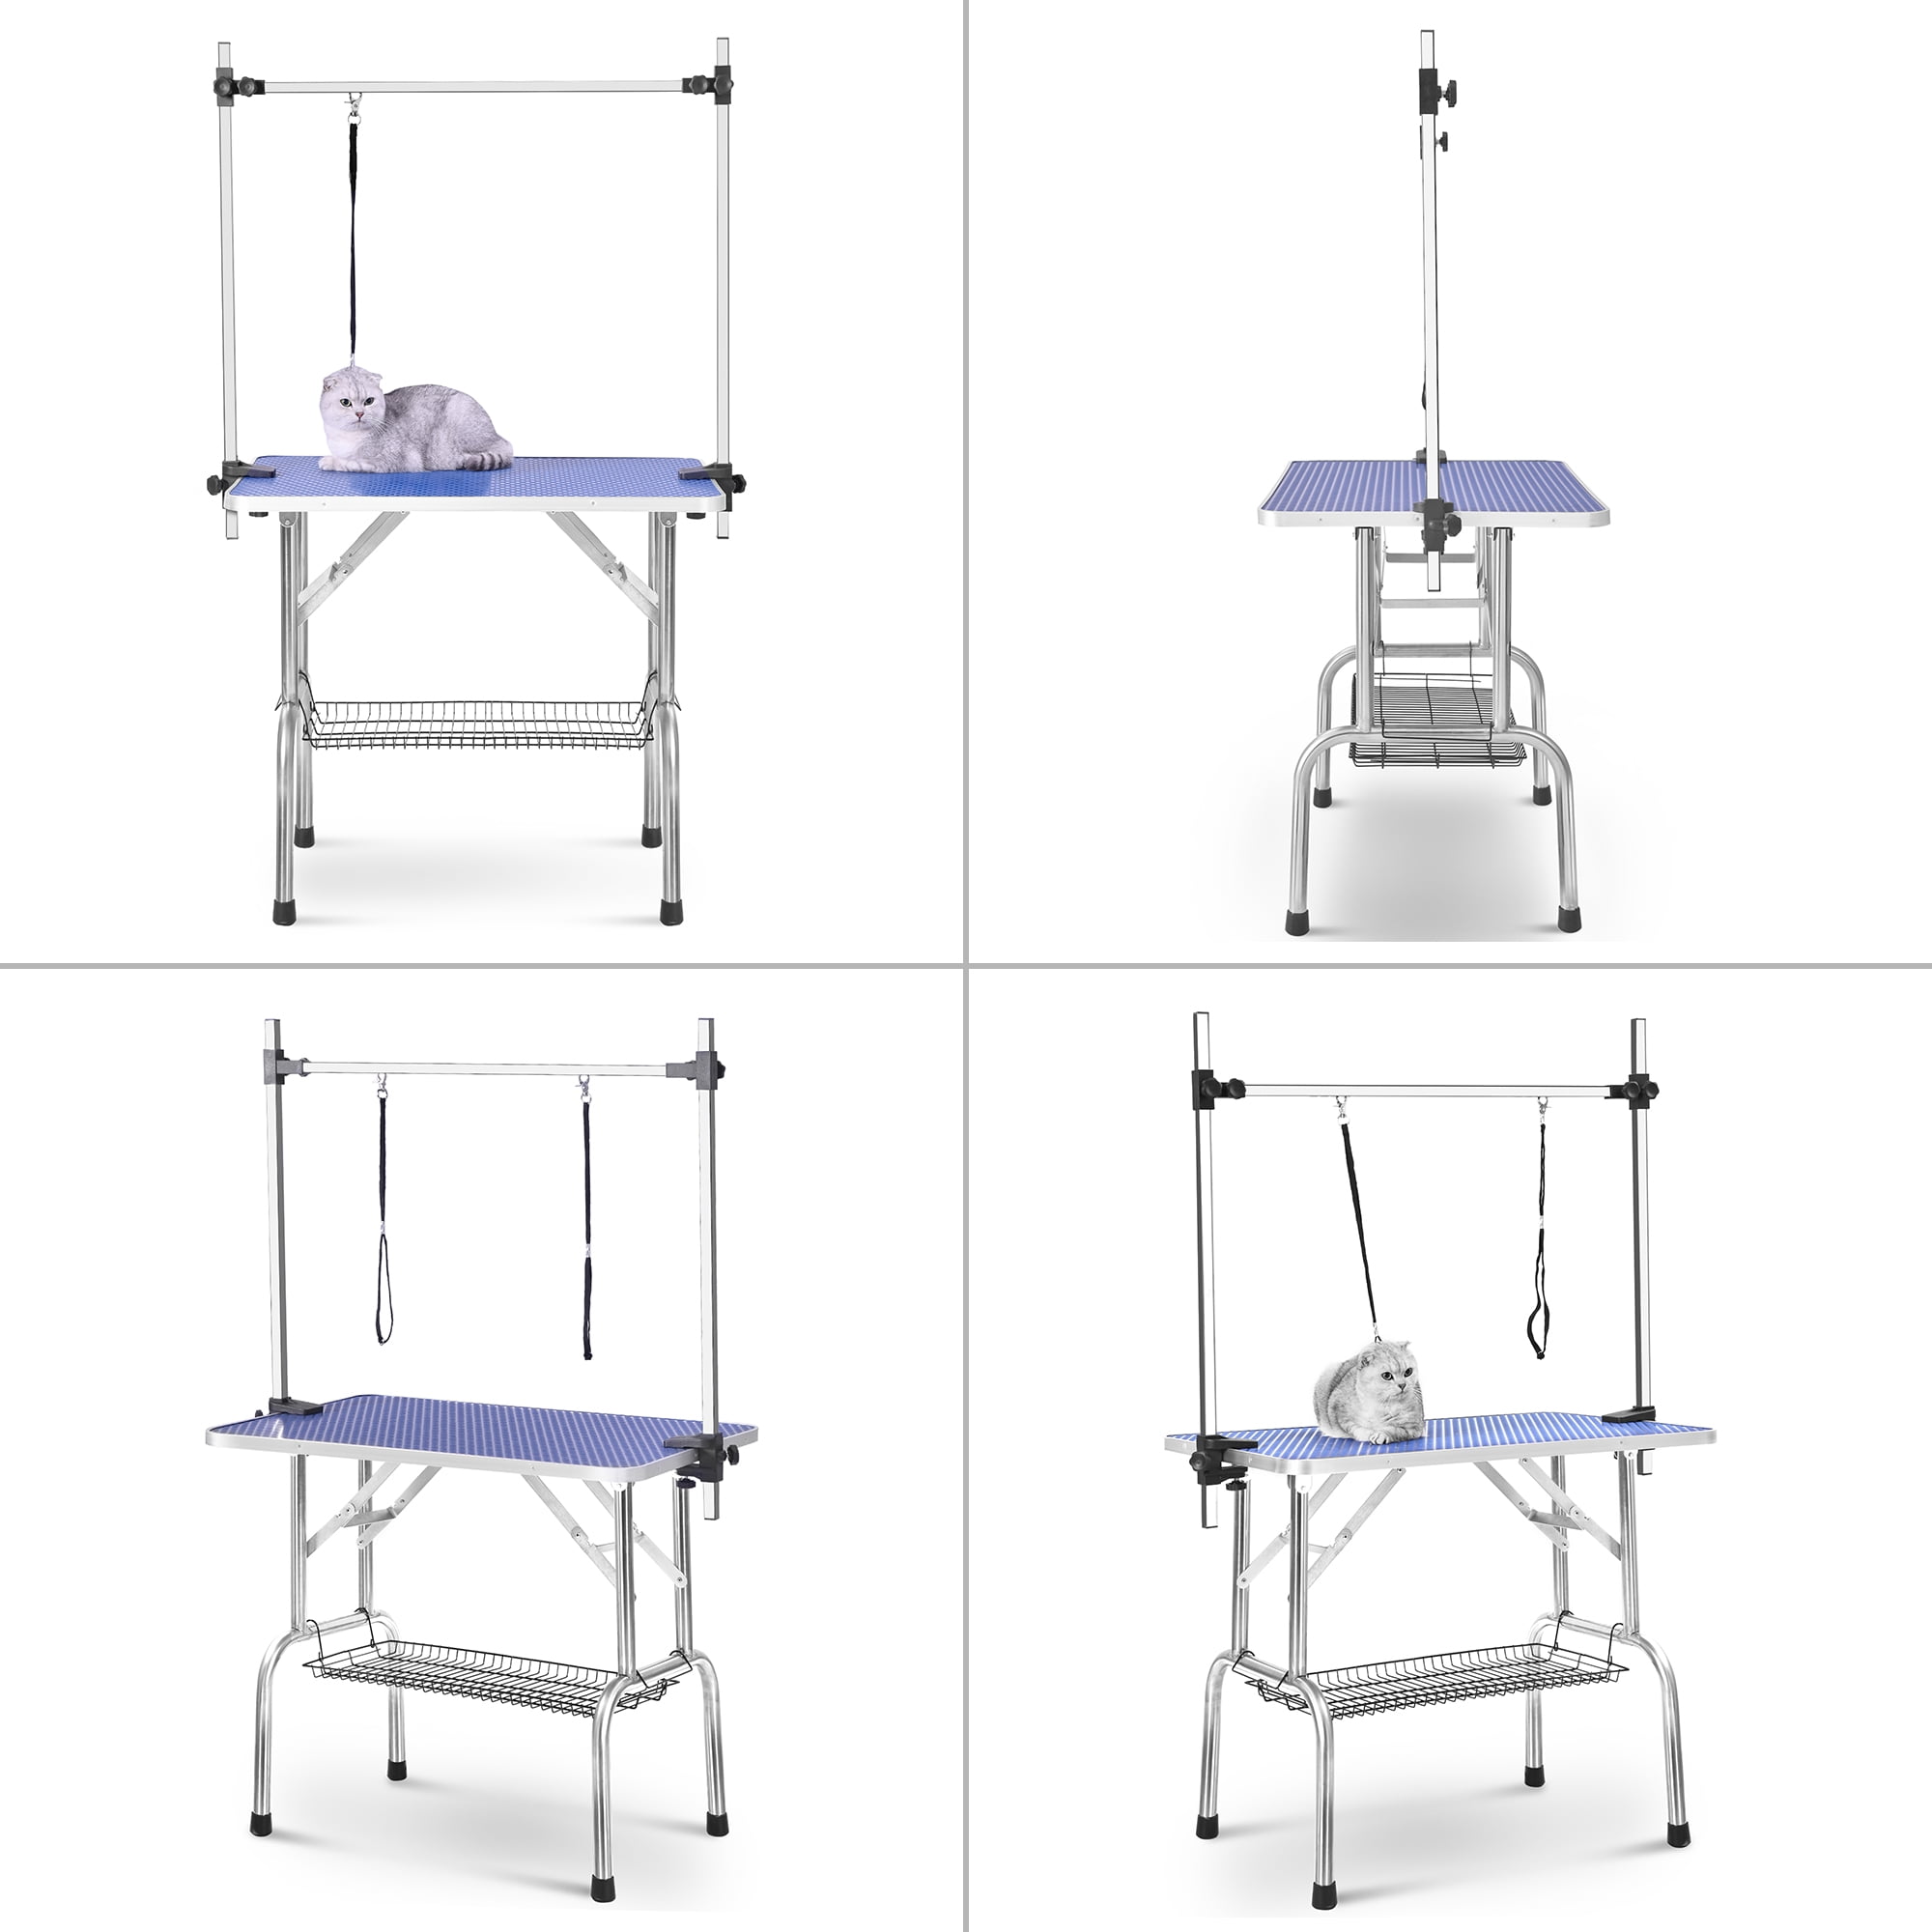 46 Dog/Pet Grooming Table Blue – Unovivy